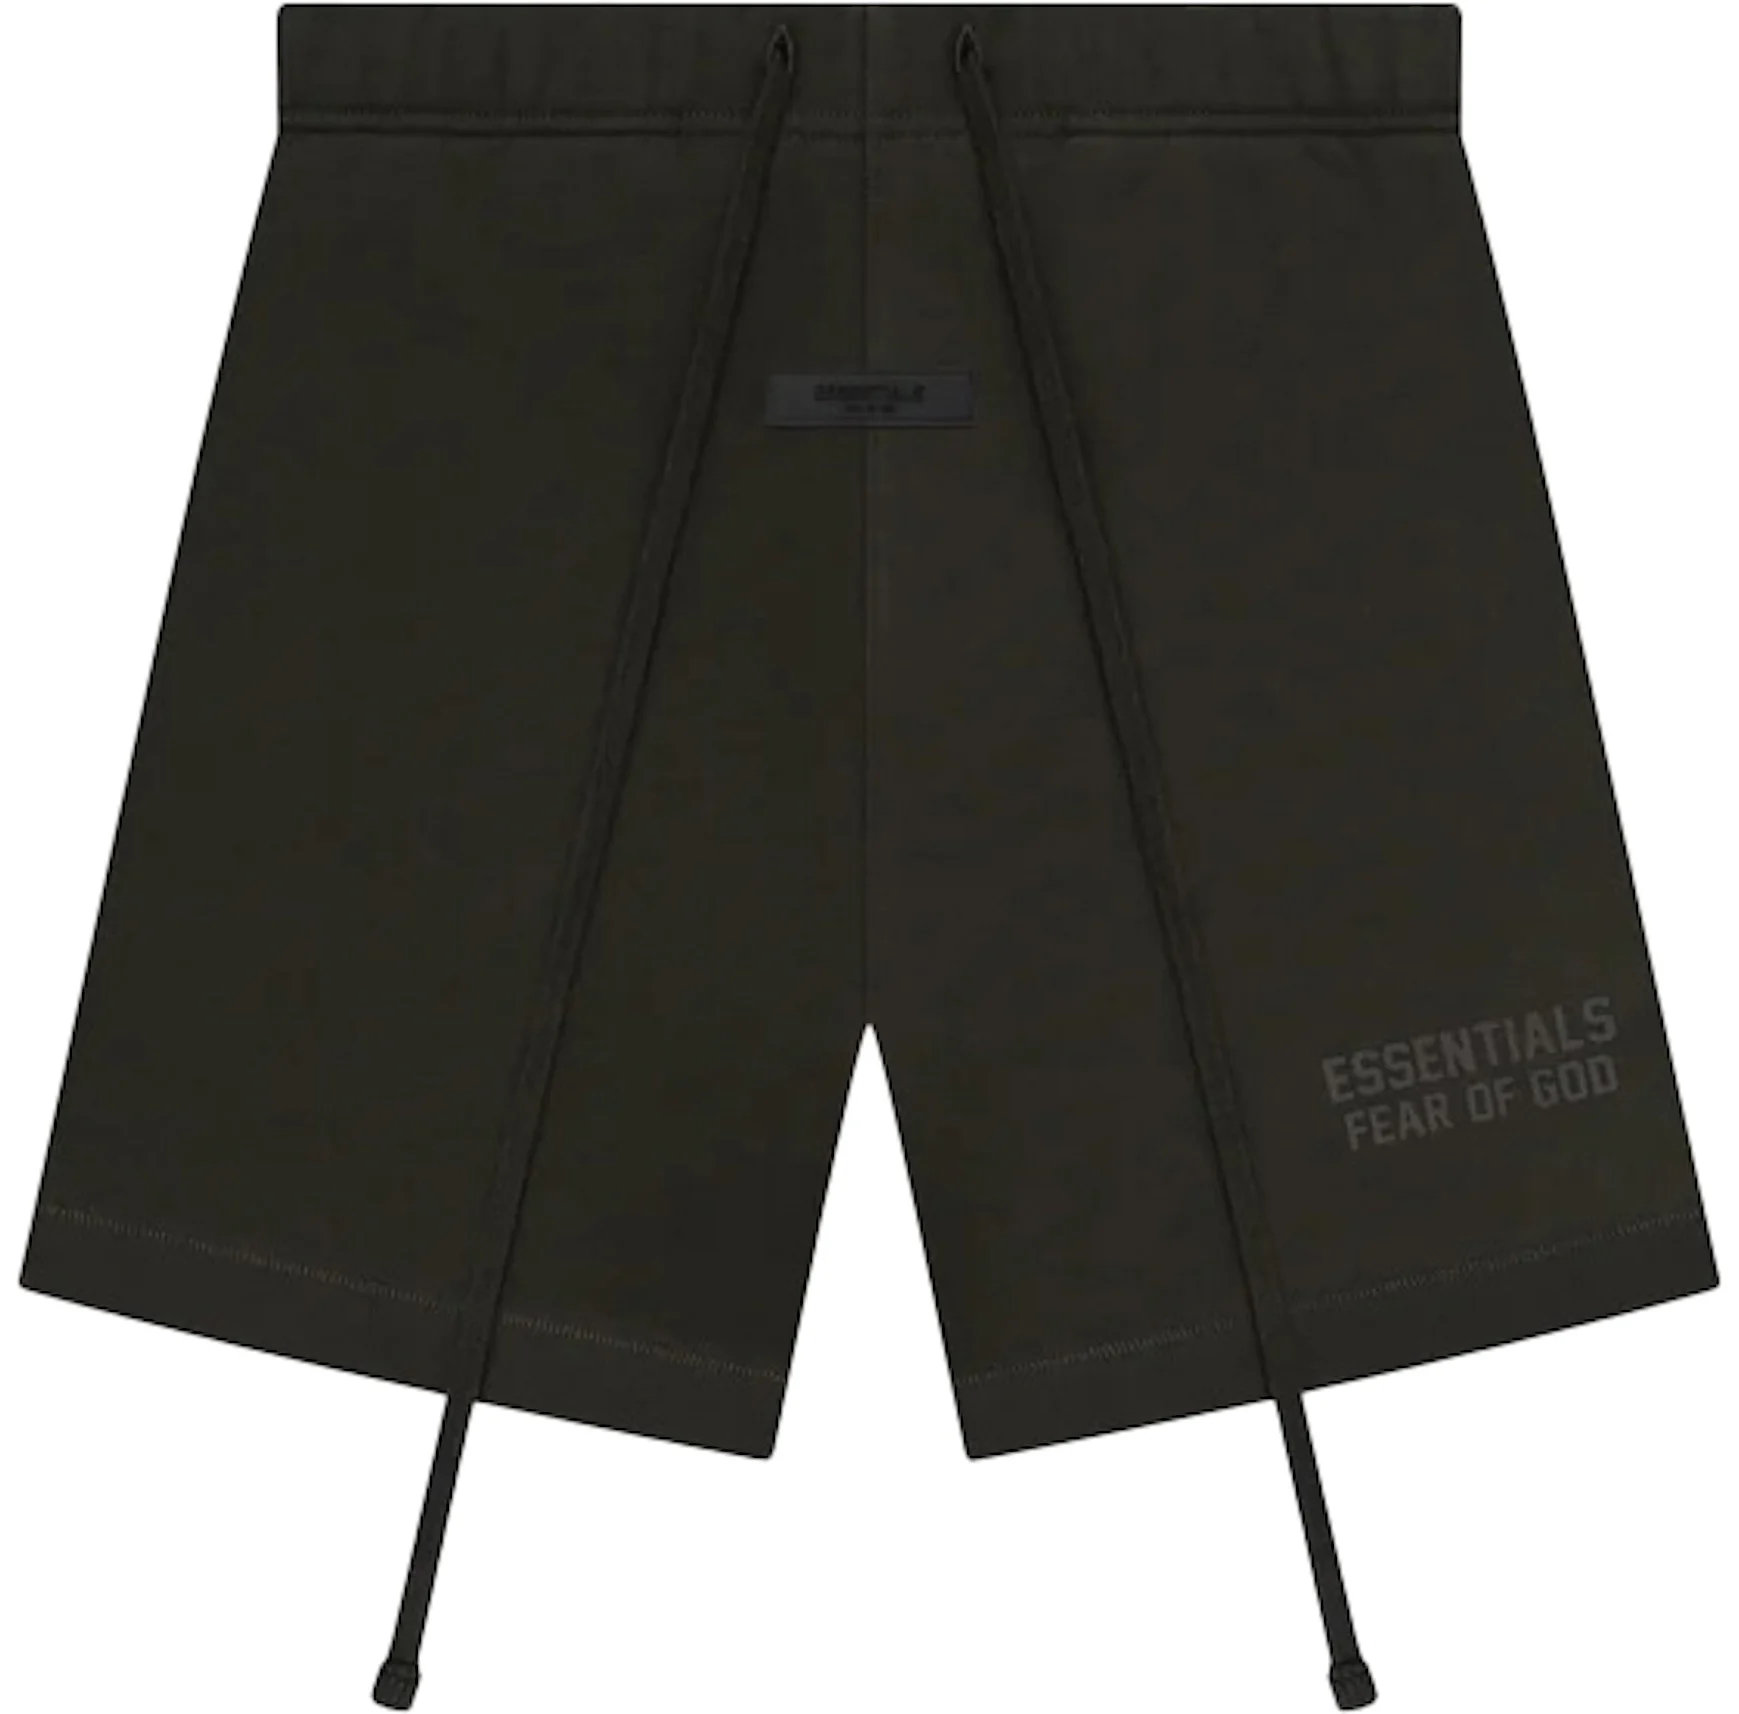 Off-White Cotton Shorts by Fear of God ESSENTIALS on Sale